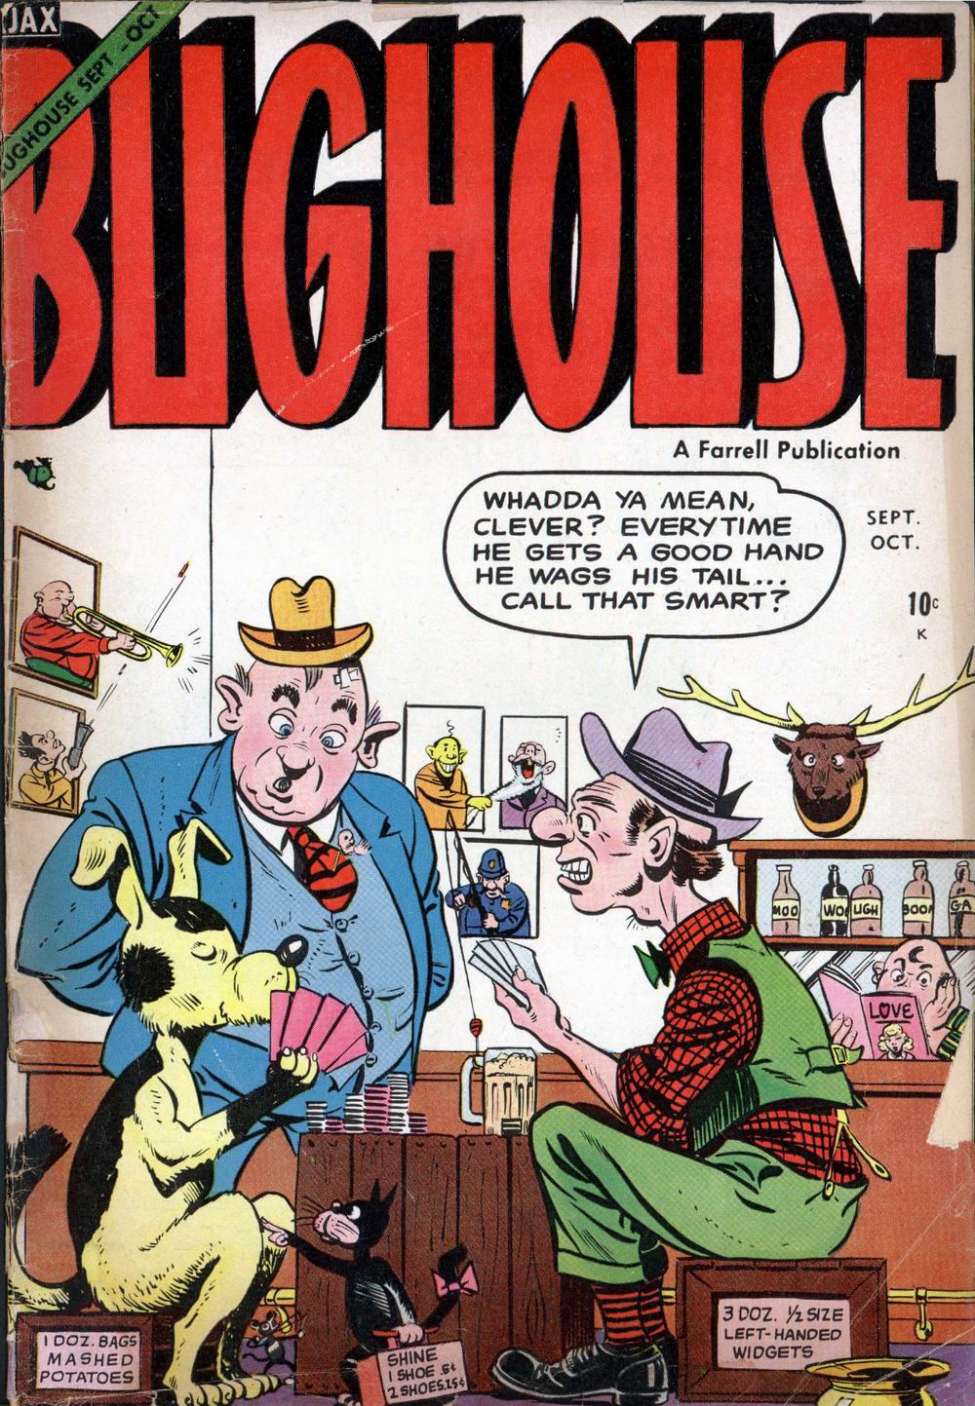 Book Cover For Bughouse 4